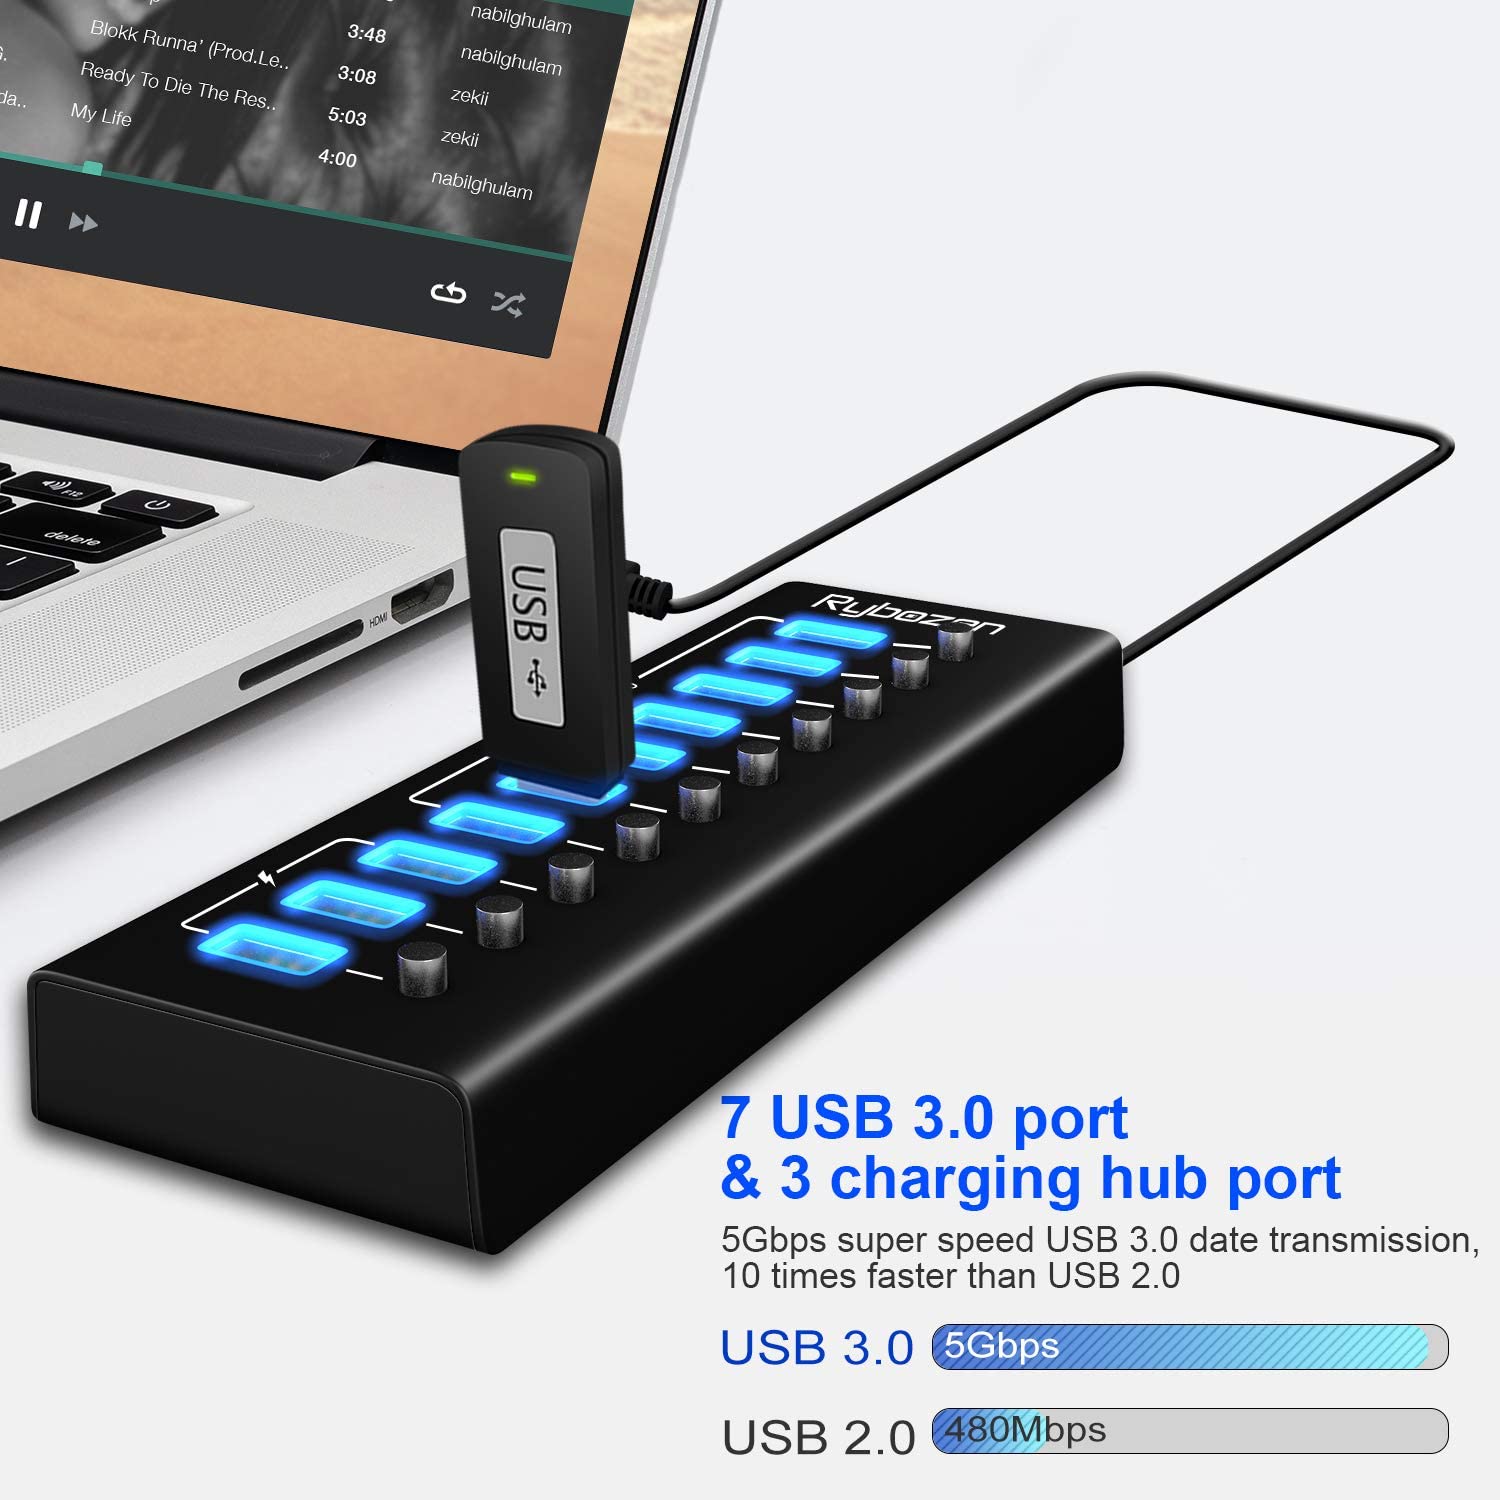 Rybozen USB Hub 3.0, 7 USB 3.0 Super Speed Data Ports and 3 USB Smart Charging Ports, with LEDs Individual Switches and Power Adapter for Keyboard, Mouse, Printer, Hard Drivers and More USB Devices